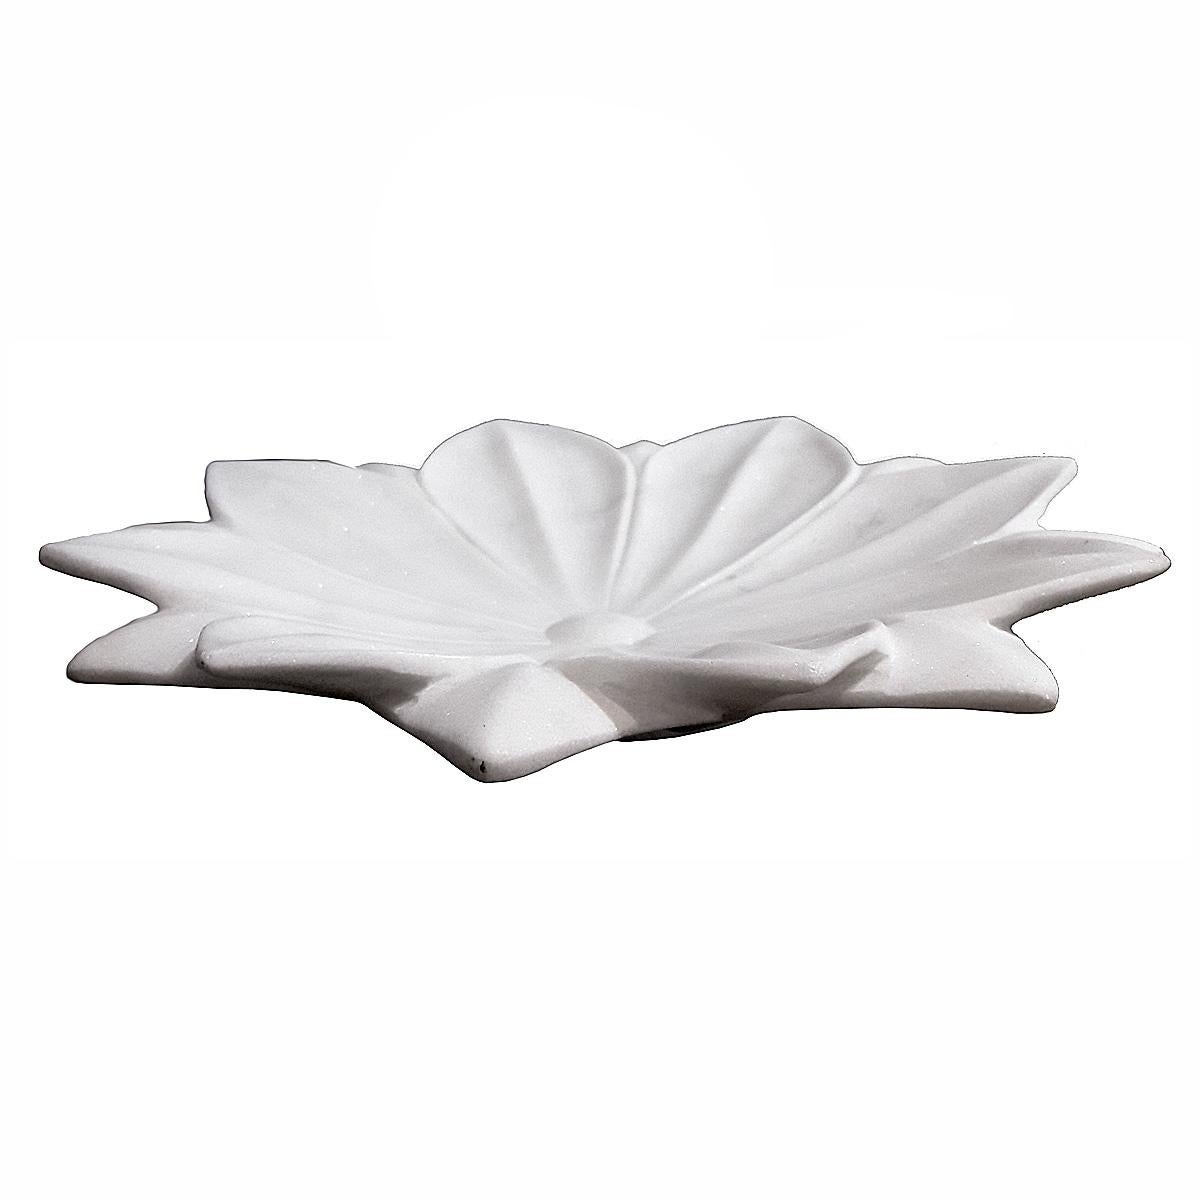 Late 20th Century Hand Carved White Marble Lotus Plate